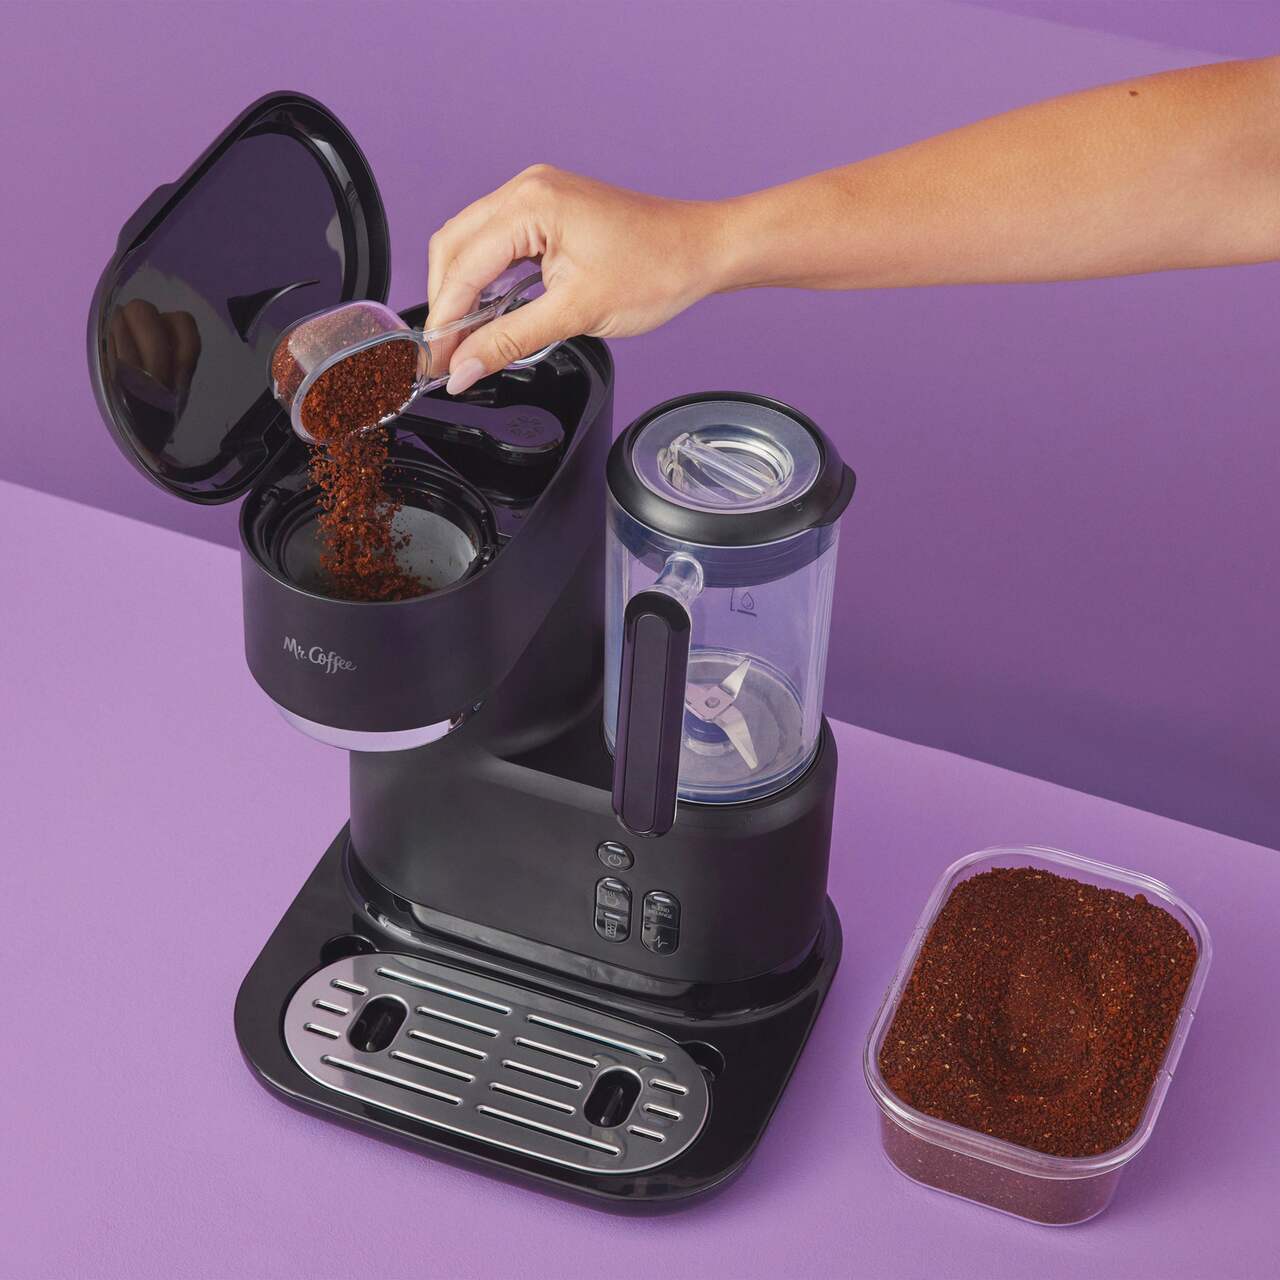 https://media-www.canadiantire.ca/product/living/kitchen/kitchen-appliances/0430151/mr-coffee-frappe-iced-and-hot-coffee-maker-and-blender-0305006a-890b-4c9d-a415-0884cbce6c74-jpgrendition.jpg?imdensity=1&imwidth=1244&impolicy=mZoom